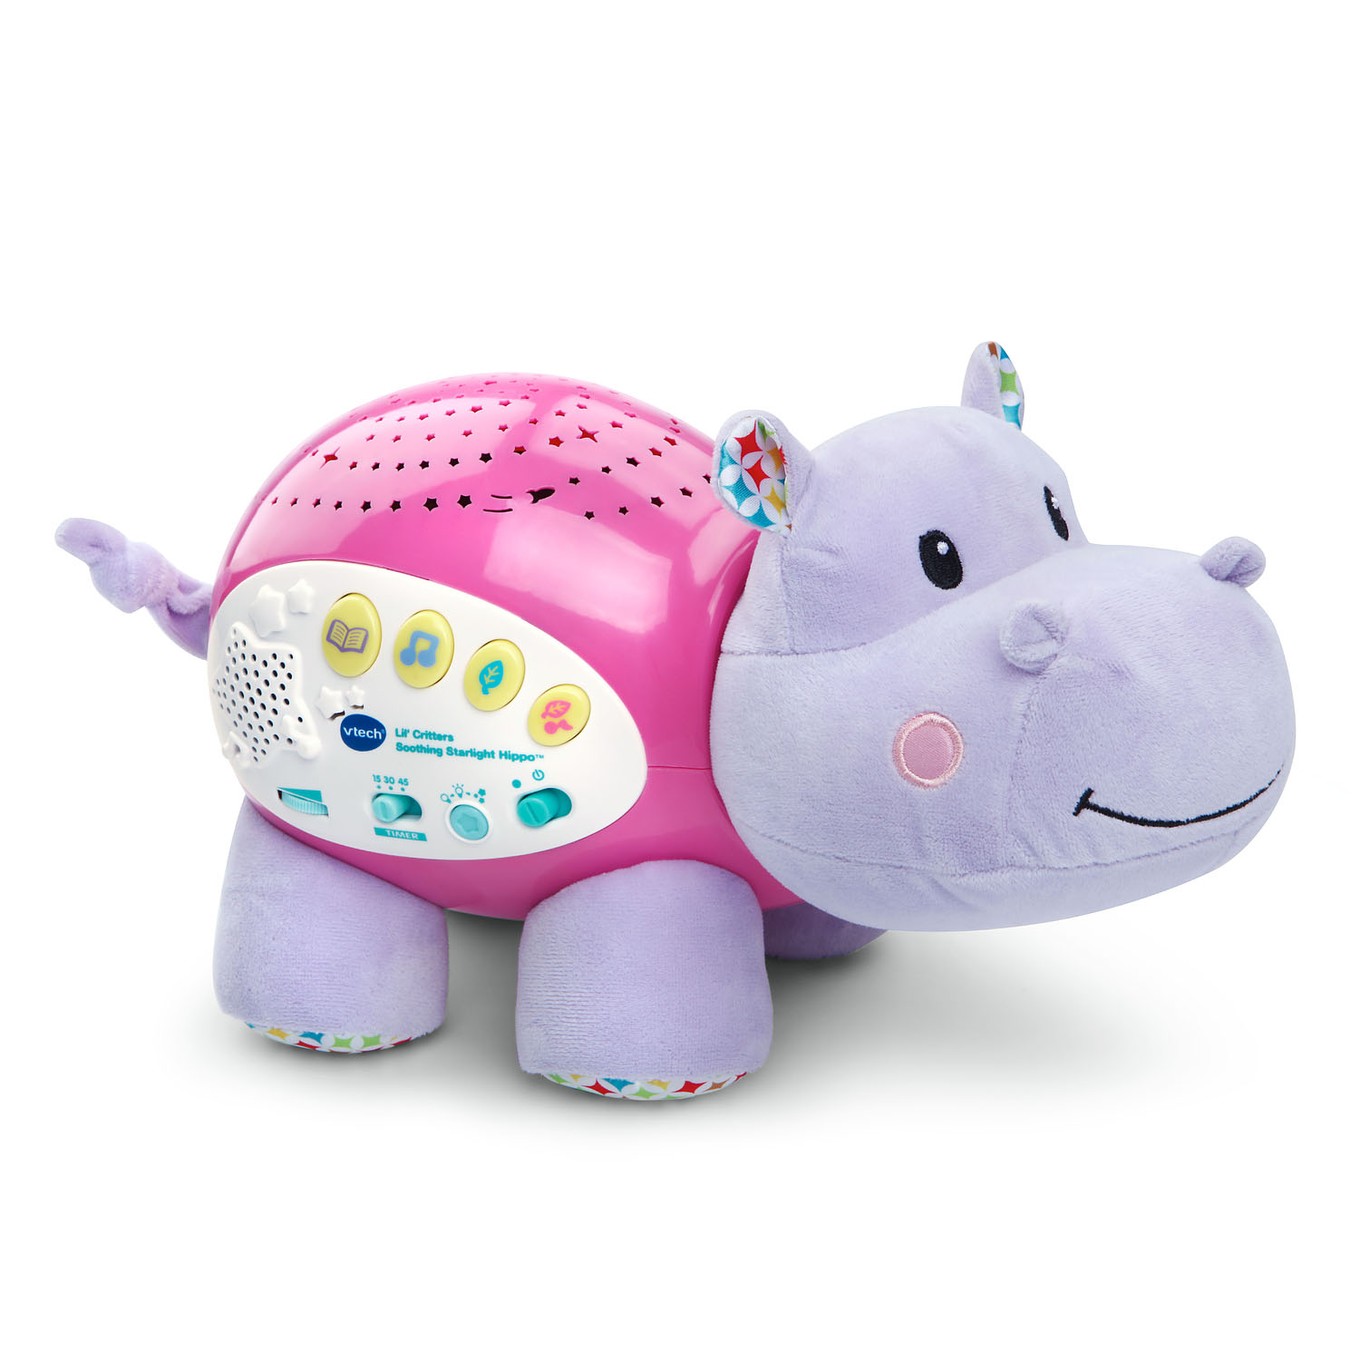 Lil' Critters Soothing Starlight Hippo™ | VTech®